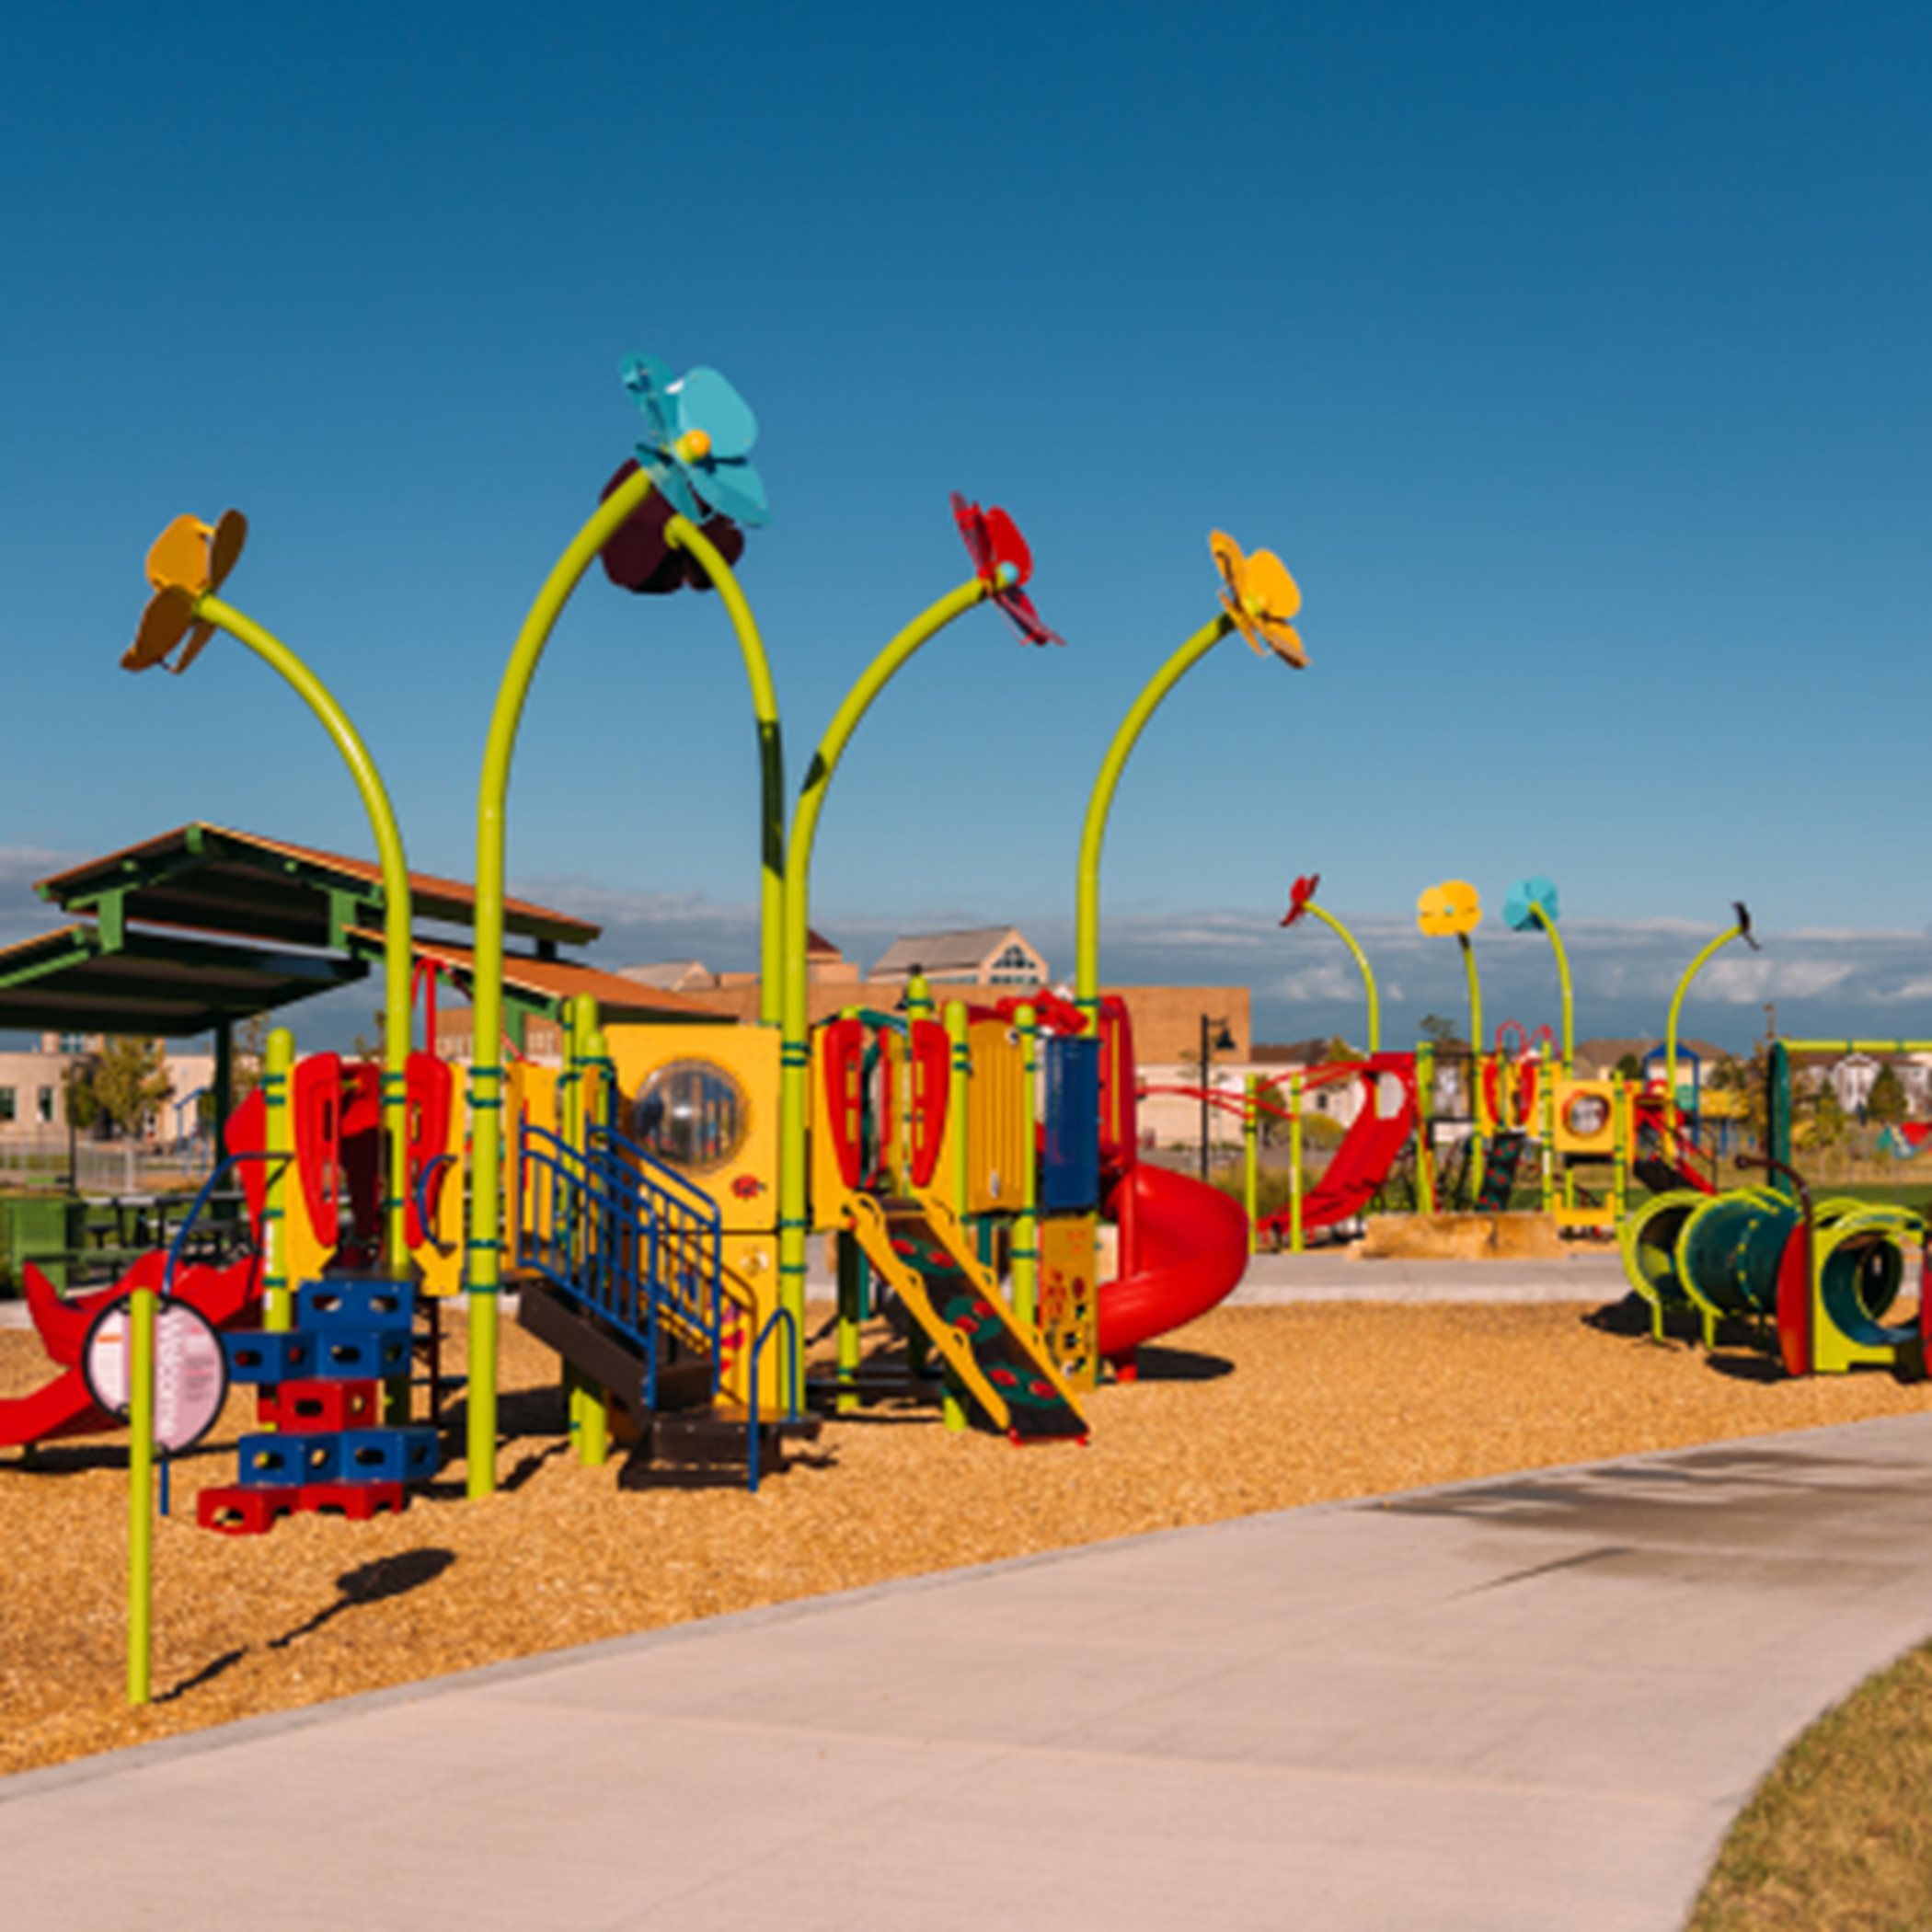 Colorful playground structure in local area